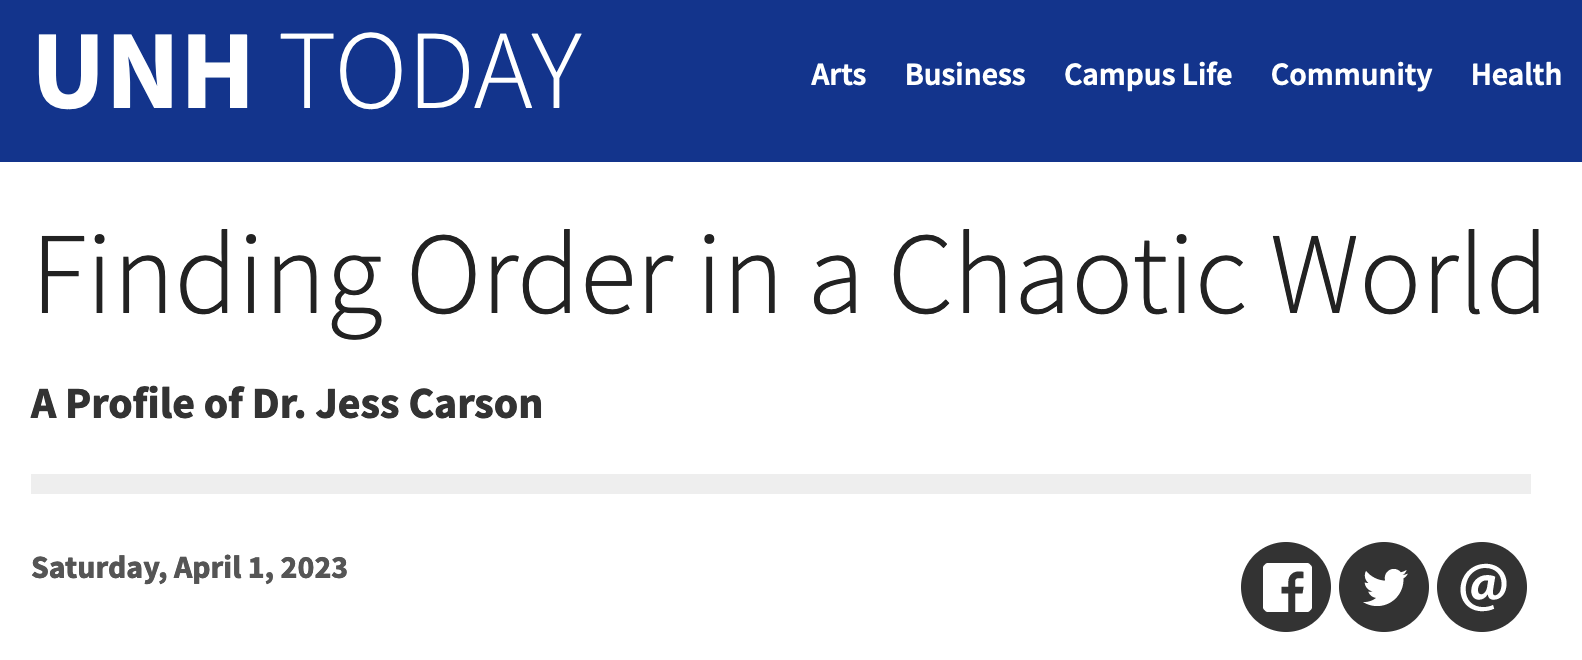 Finding Order in a Chaotic World - A Profile of Dr. Jess Carlson